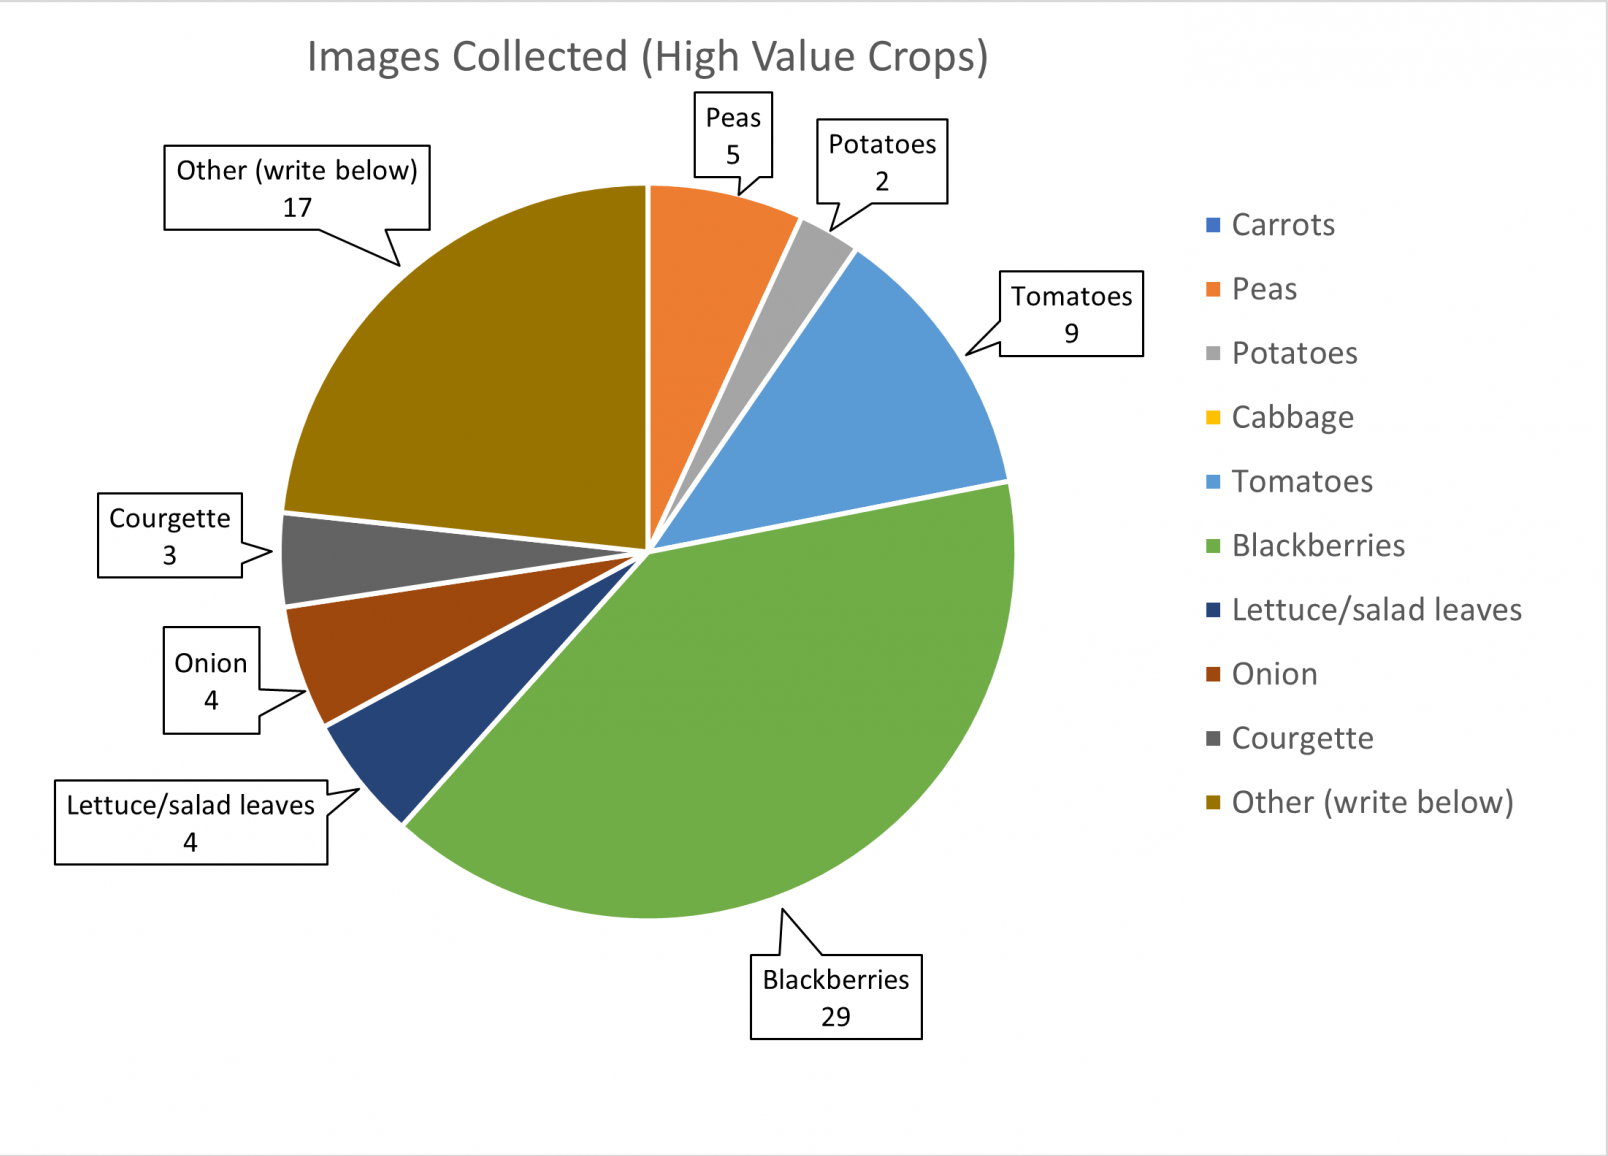 High Value Crops images as of 14 September